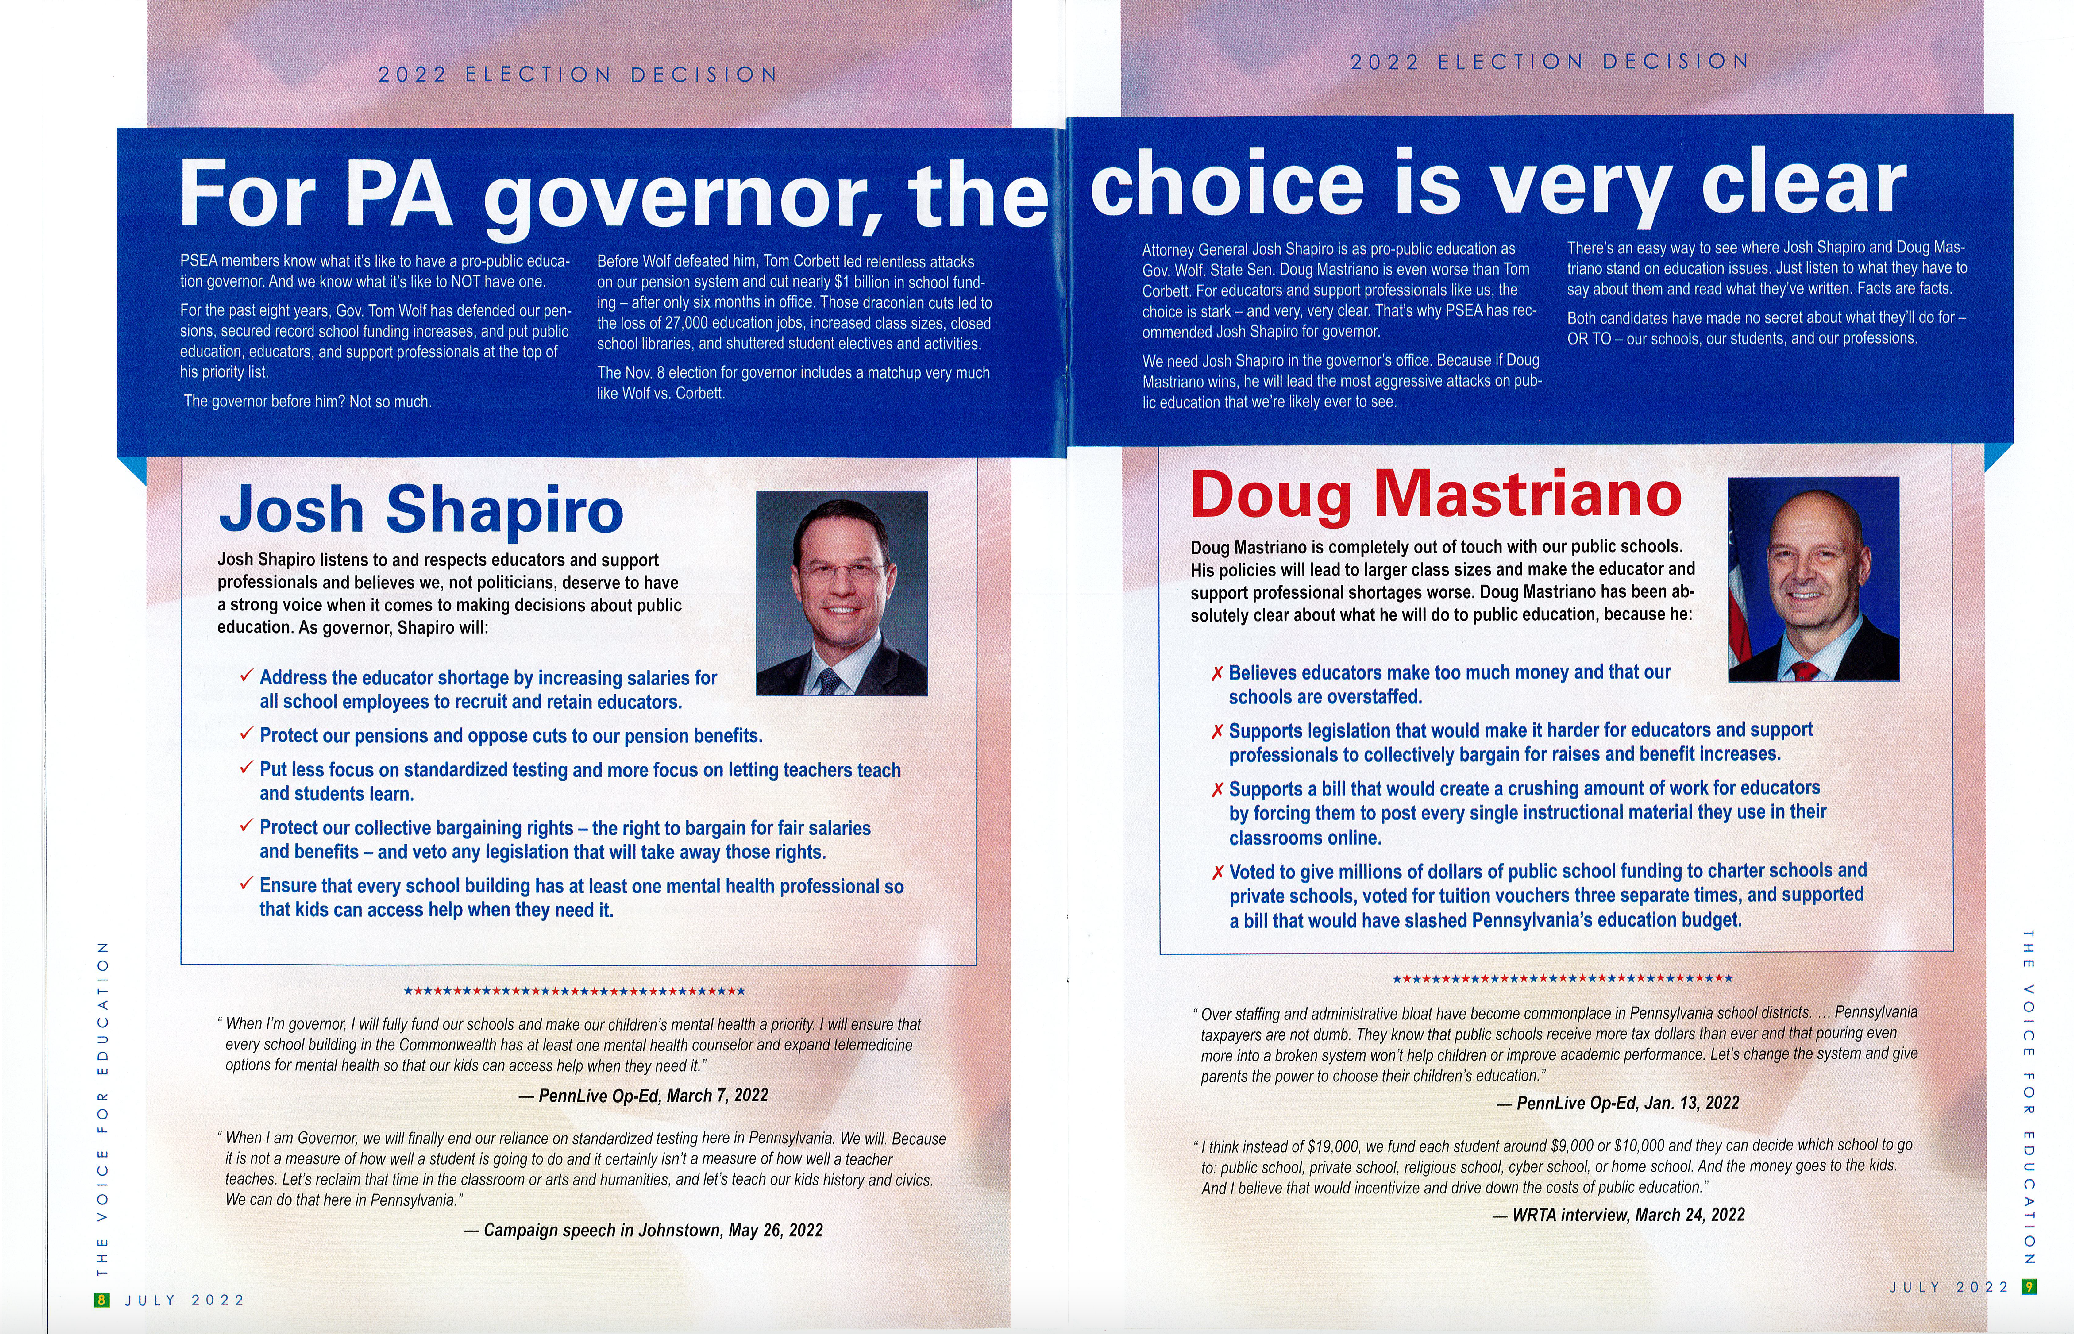 PSEA uses dues-funded magazine to support Josh Shapiro for governor